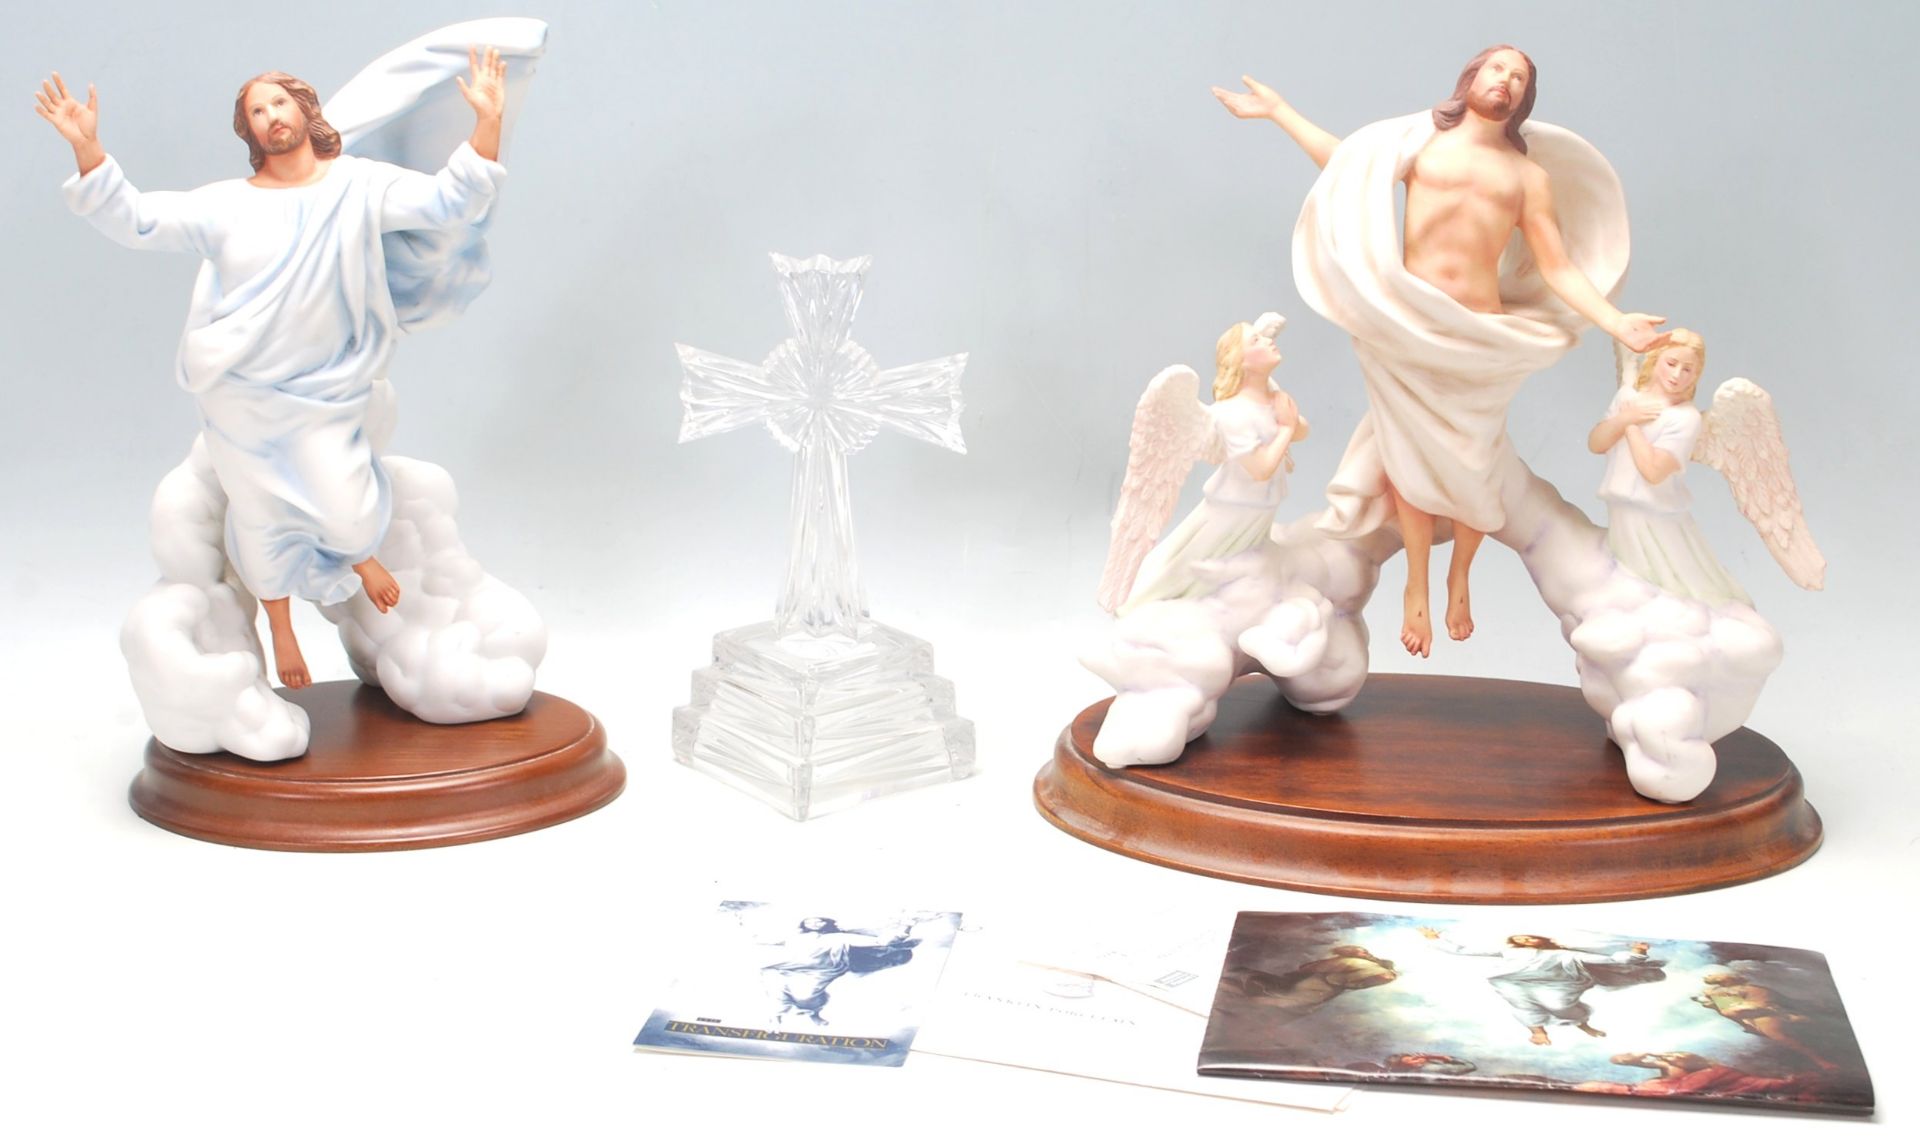 The Transfiguration by Franklin Mint hand painted fine porcelain ceramic figurine depicting Christ